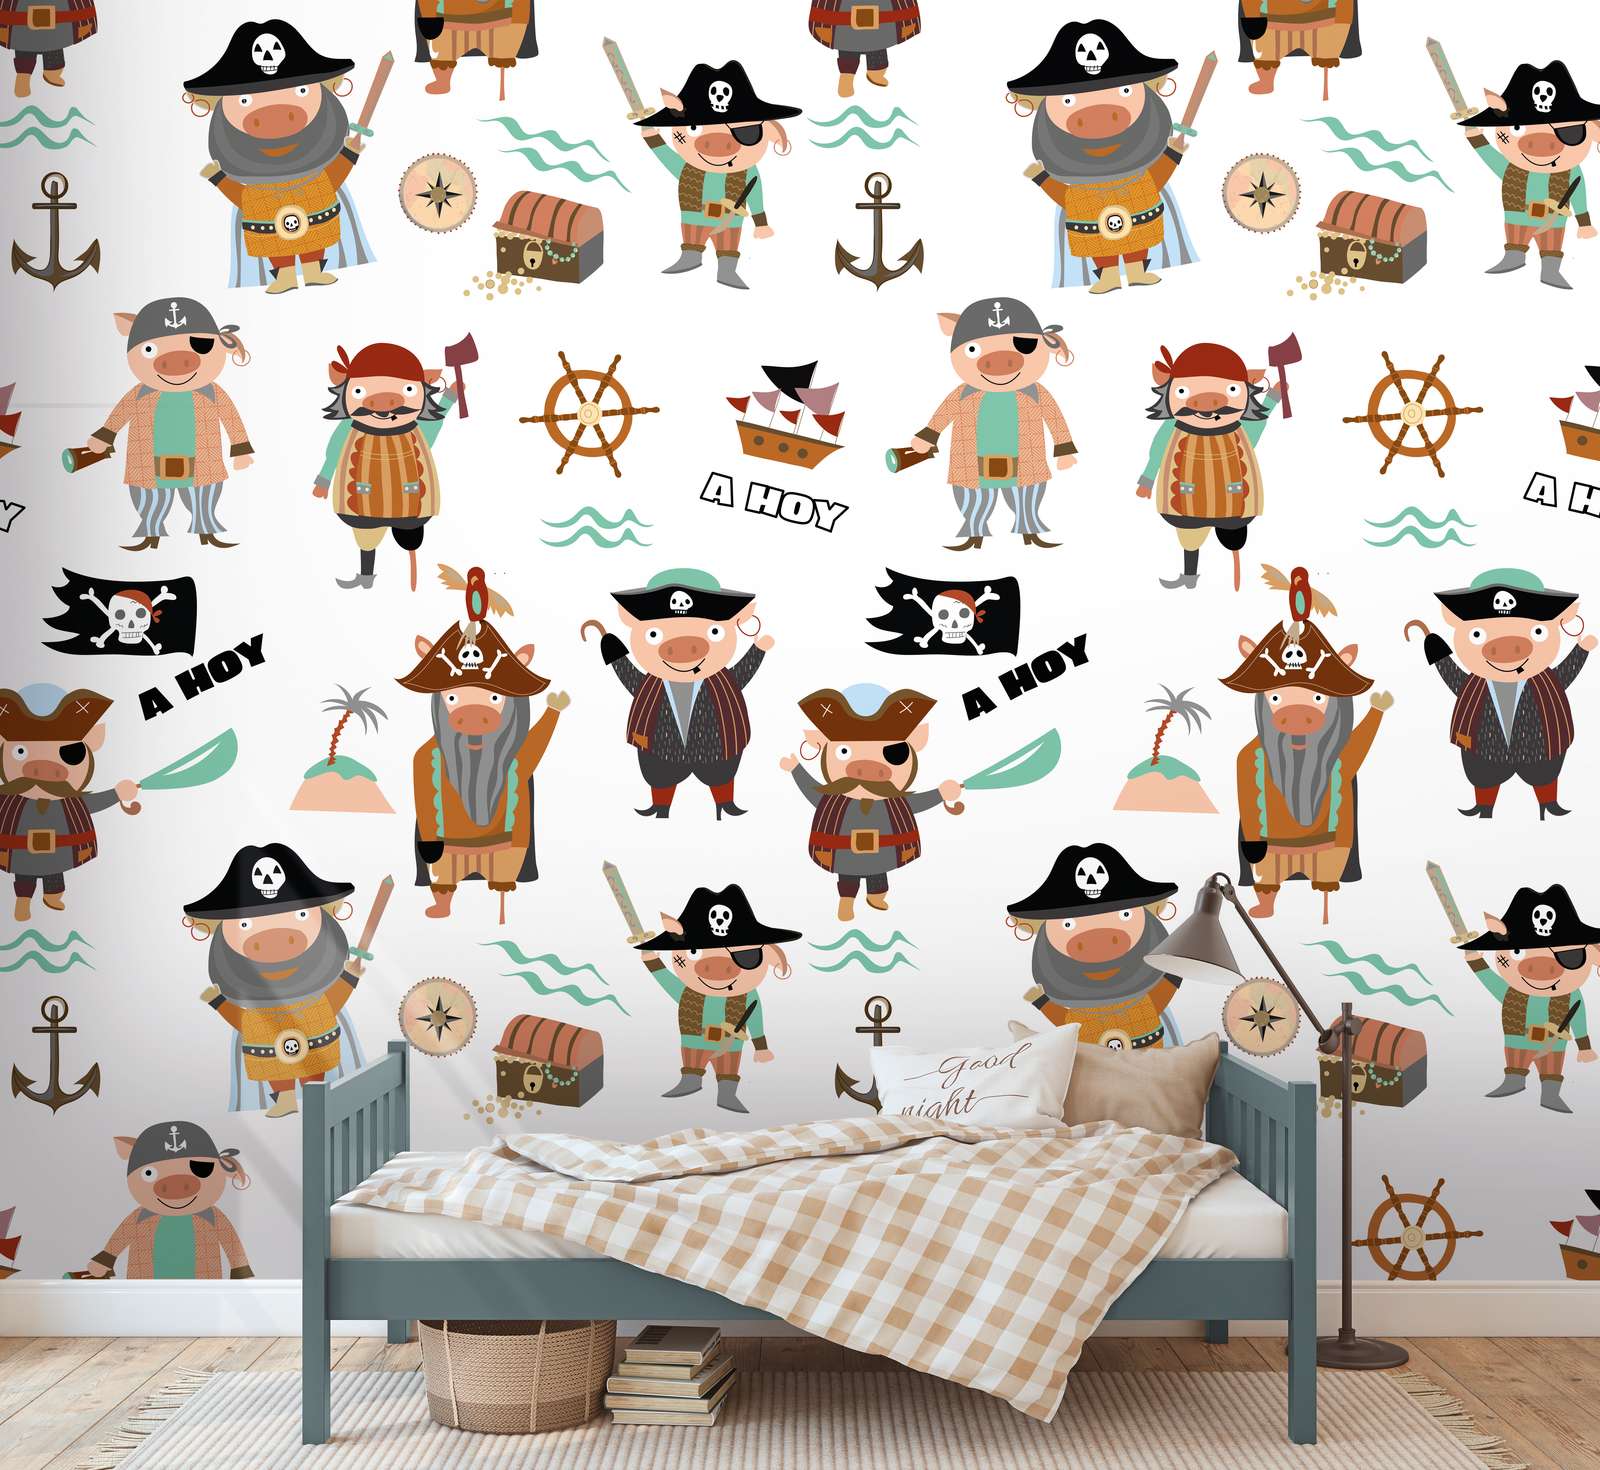             Children's wallpaper with various pirates and symbols - colourful, cream, brown
        